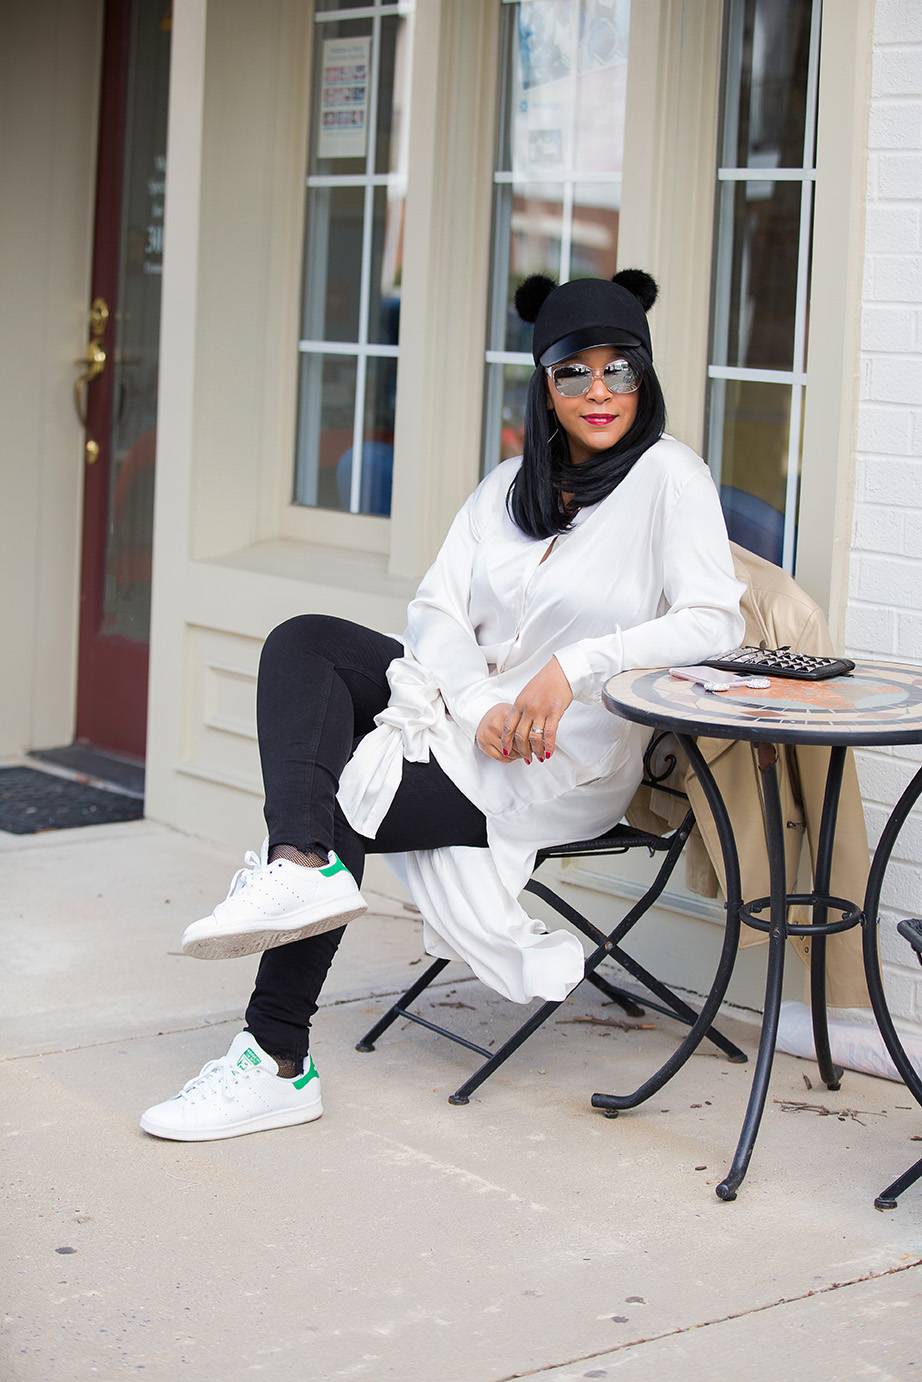 What's Haute Closet: Sometimes you just wanna kick up & kick off your heels: H&M Wool Hat with fur ball cat ears, H&M maxi shirt, adidas Stan Smith sneakers, Topshop Step Hem Jeans, Fishnet Socks, CNC by Costume National Studded Wristlet Clutch, gold leather moto jacket